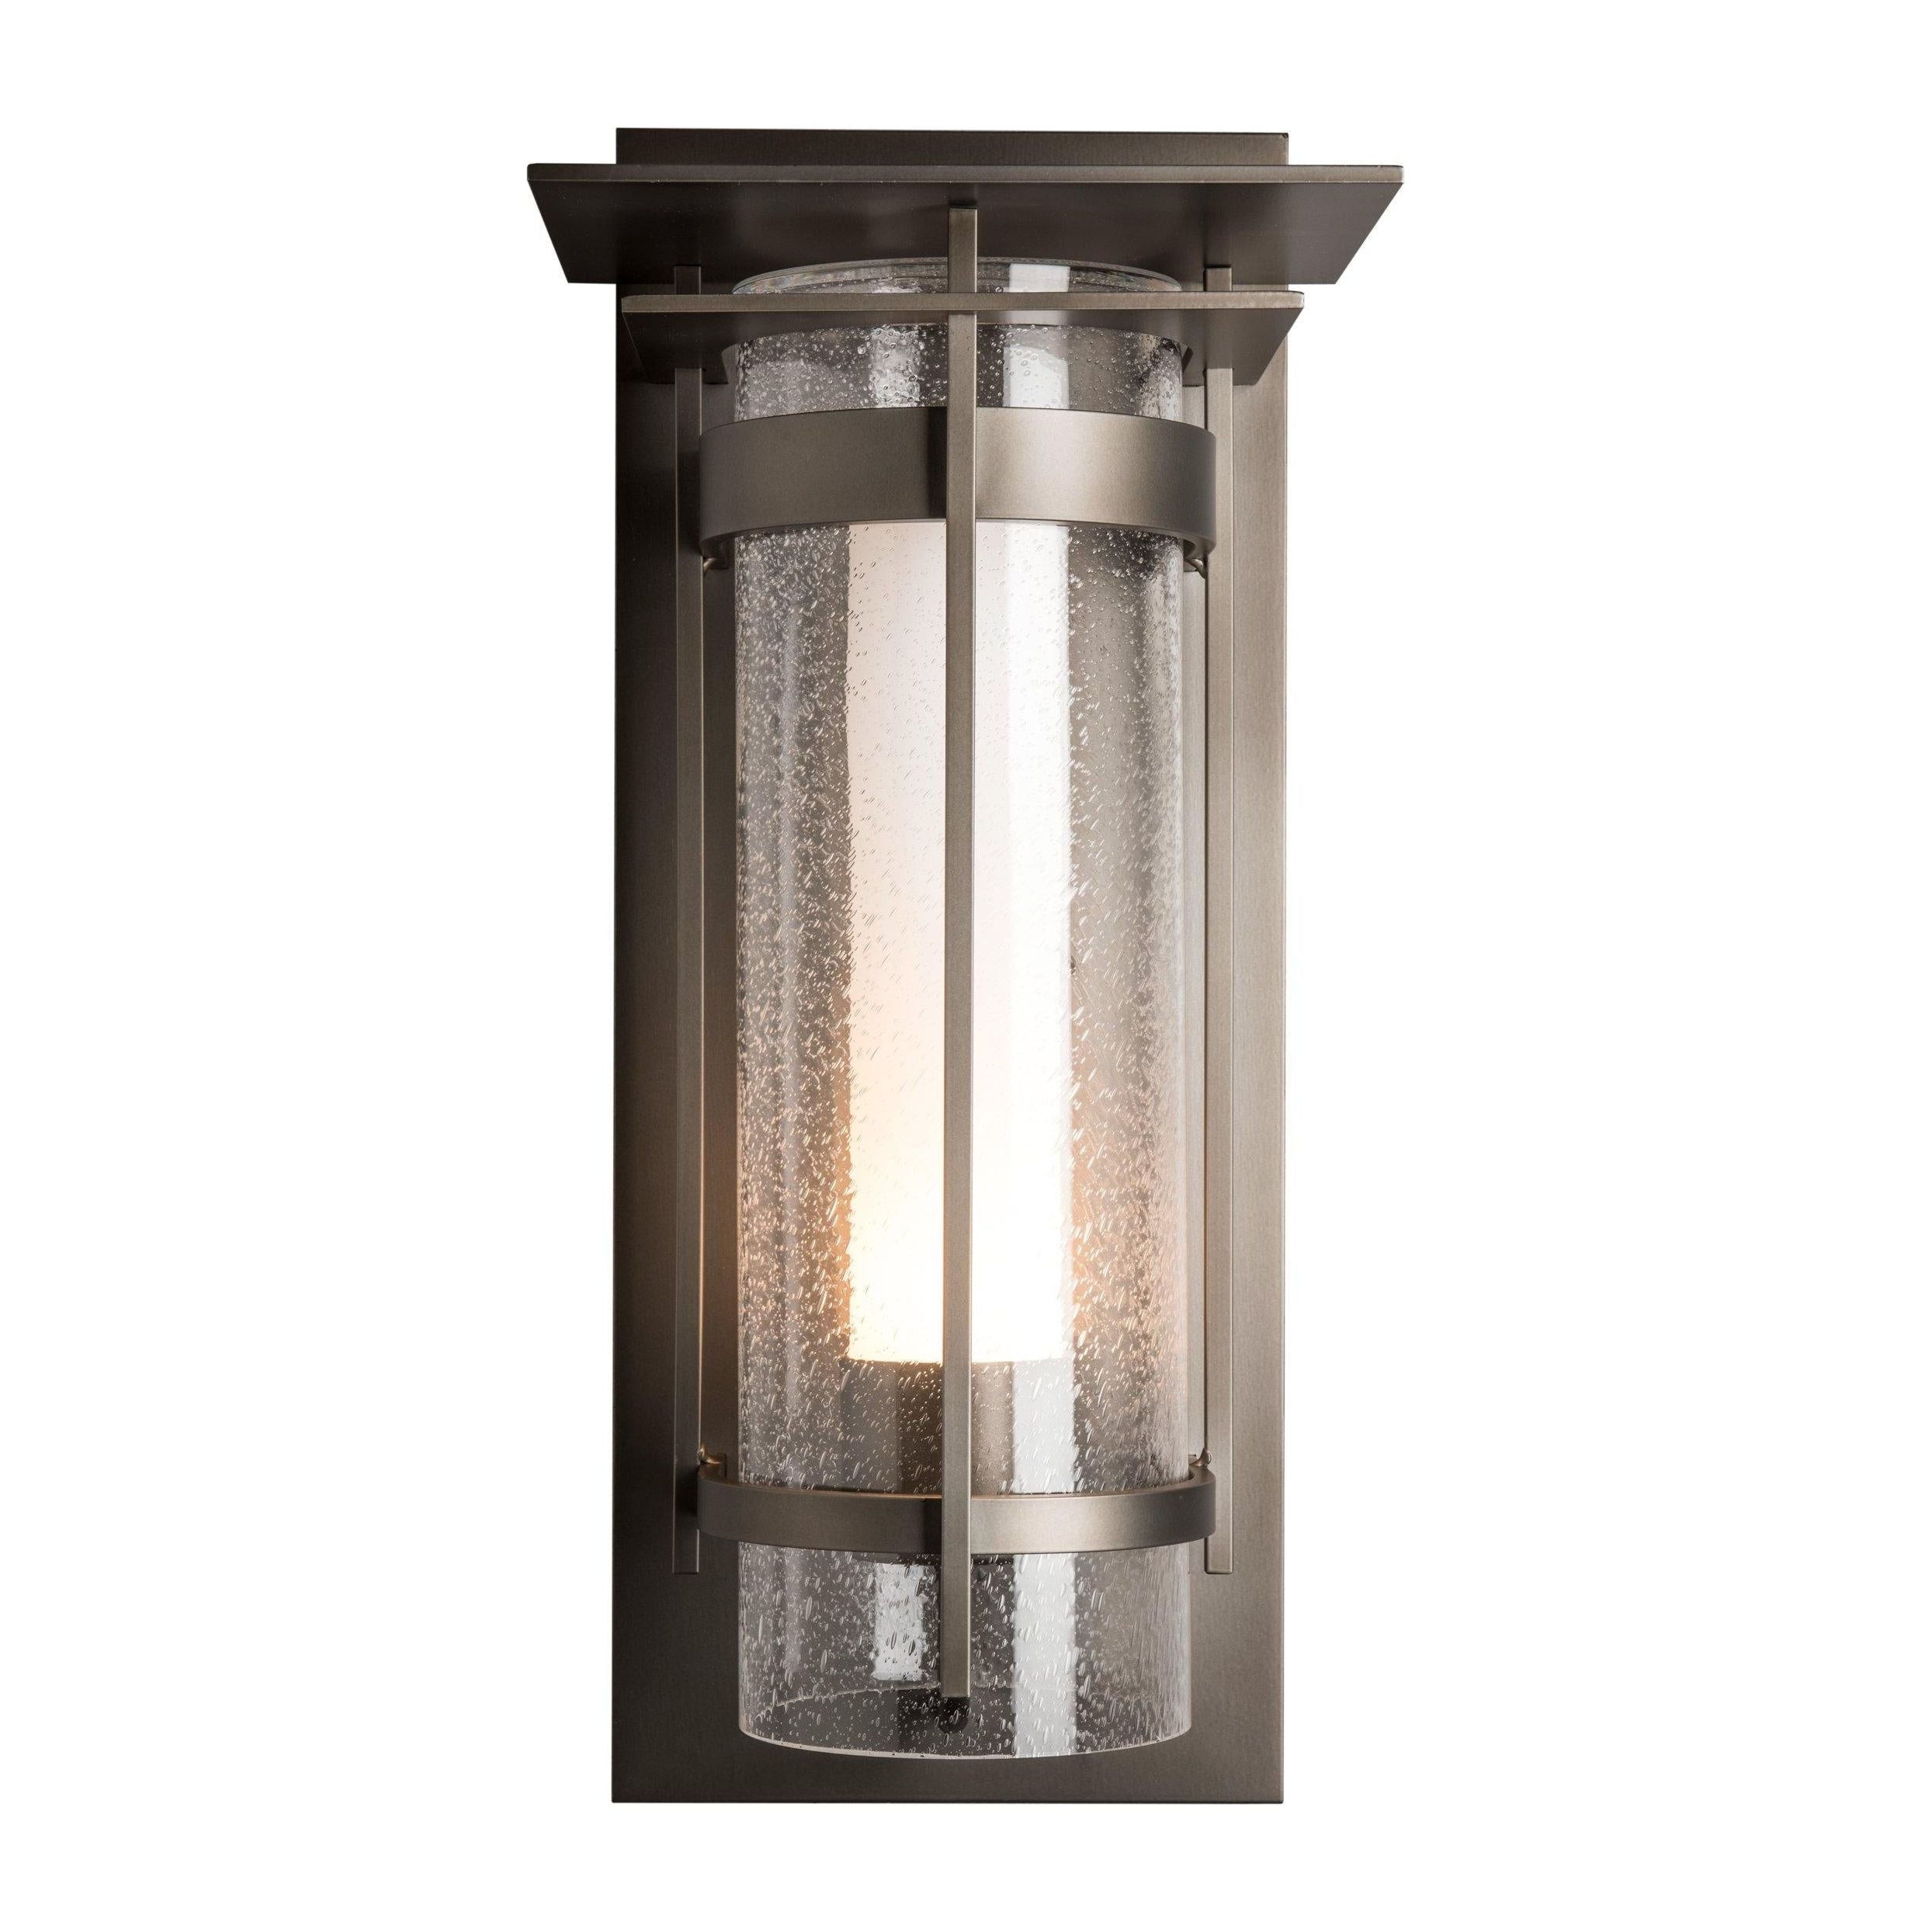 Hubbardton Forge - Banded Outdoor-Wall-Light - Lights Canada